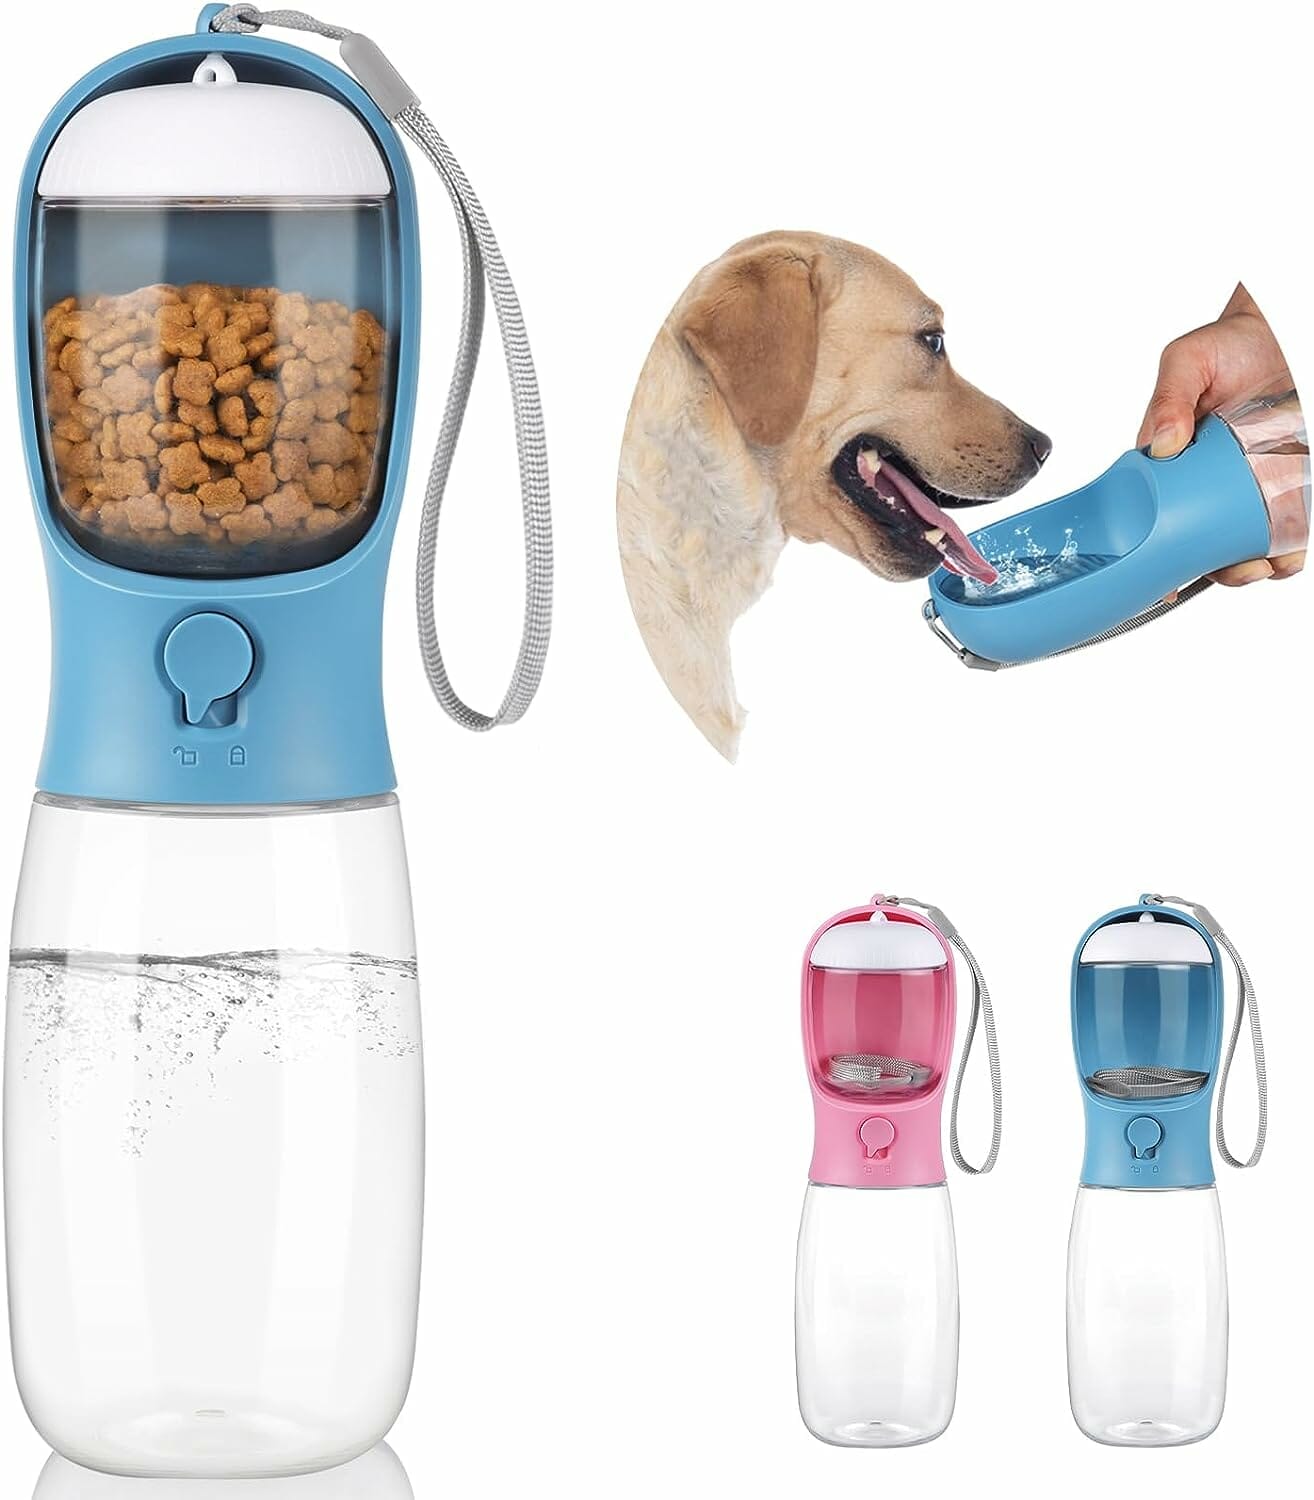 Kytely Dog Water Bottle Review: Is It Worth It for Your Furry Friend?